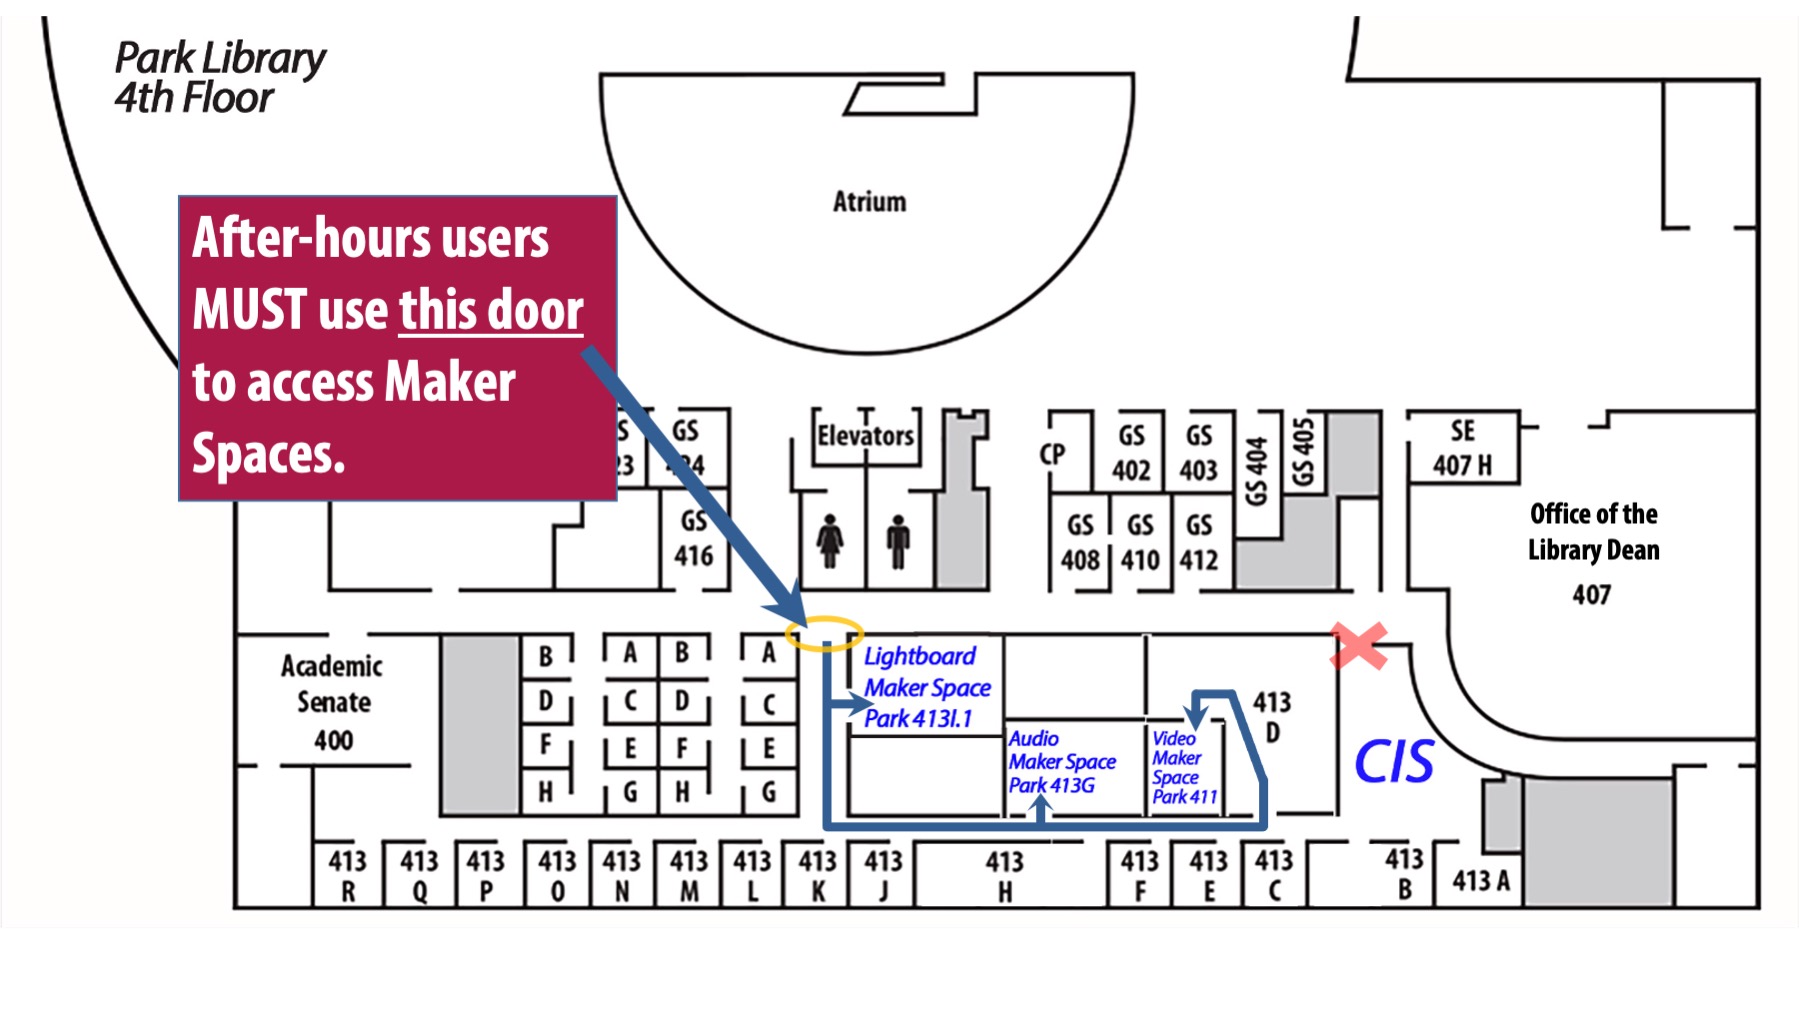 Map of Park Library 4th floor showing Maker Space locations